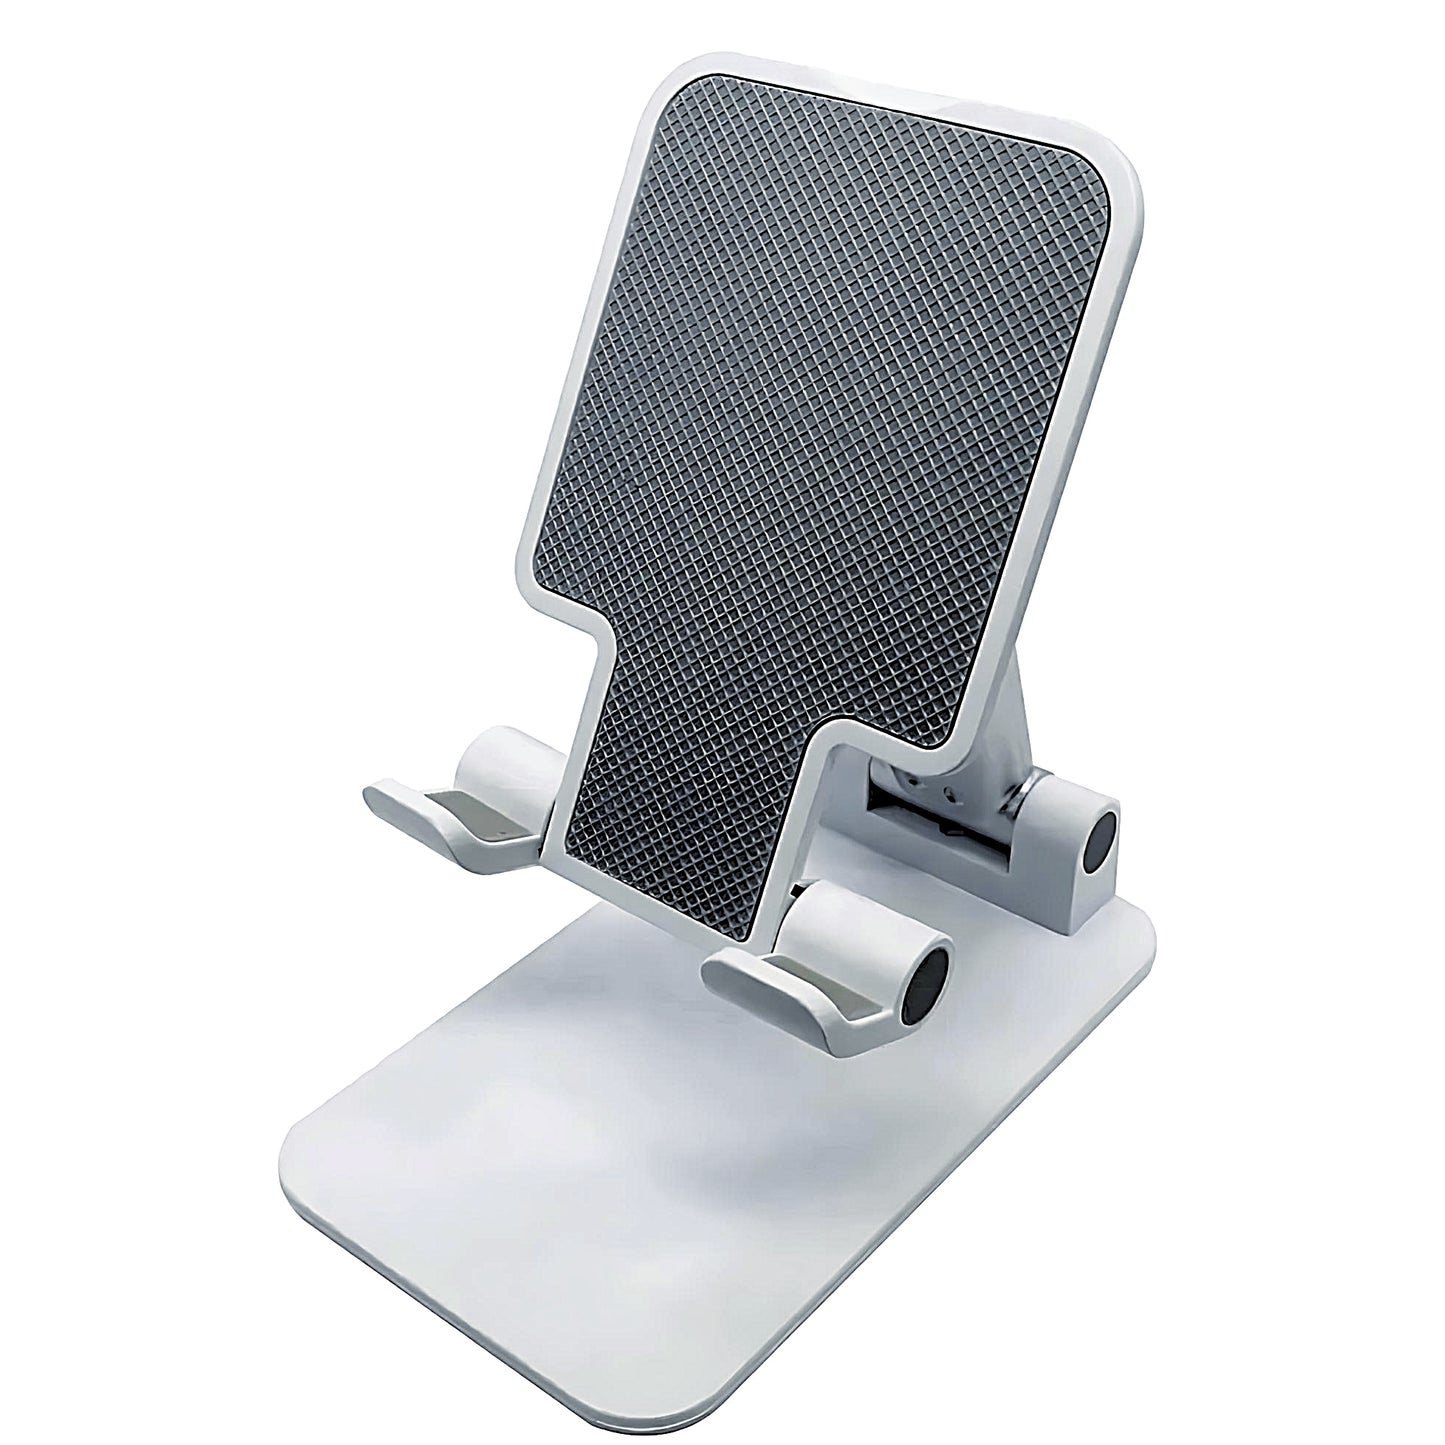 Mobile Phone Stand for Desk, Foldable Portable Adjustable